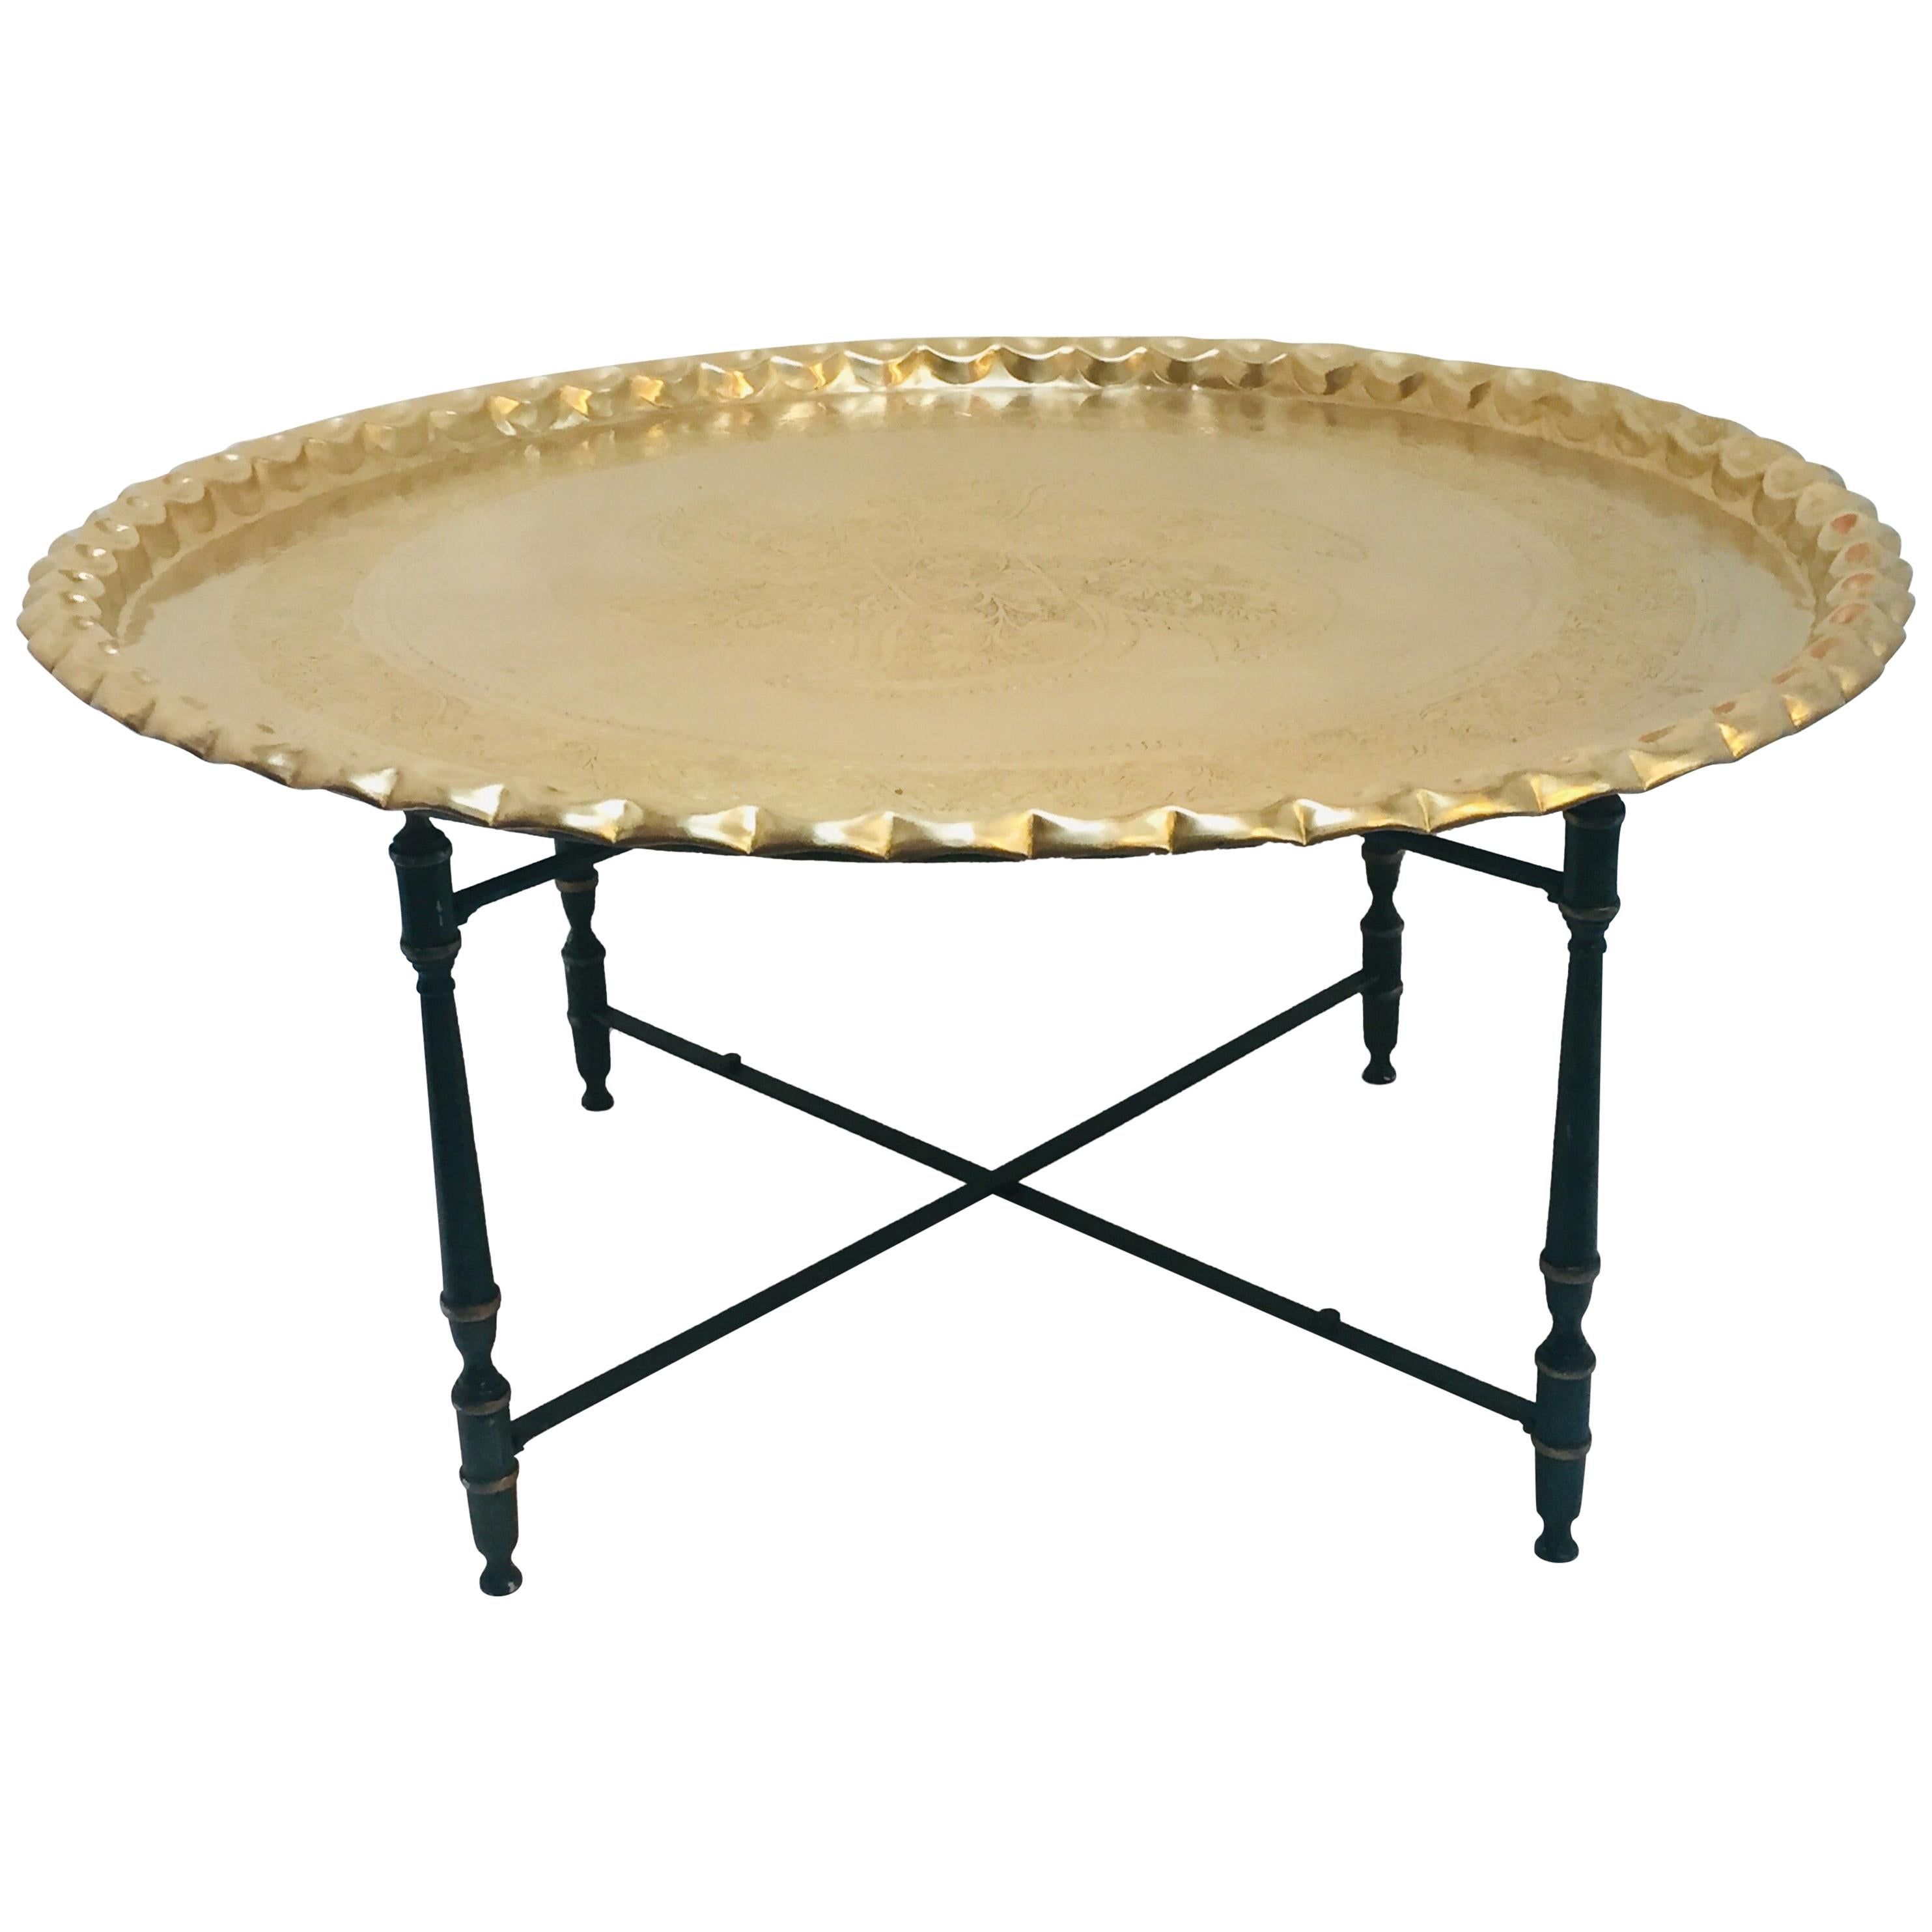 Moroccan Brass Tray Table on Metal Folding Stand